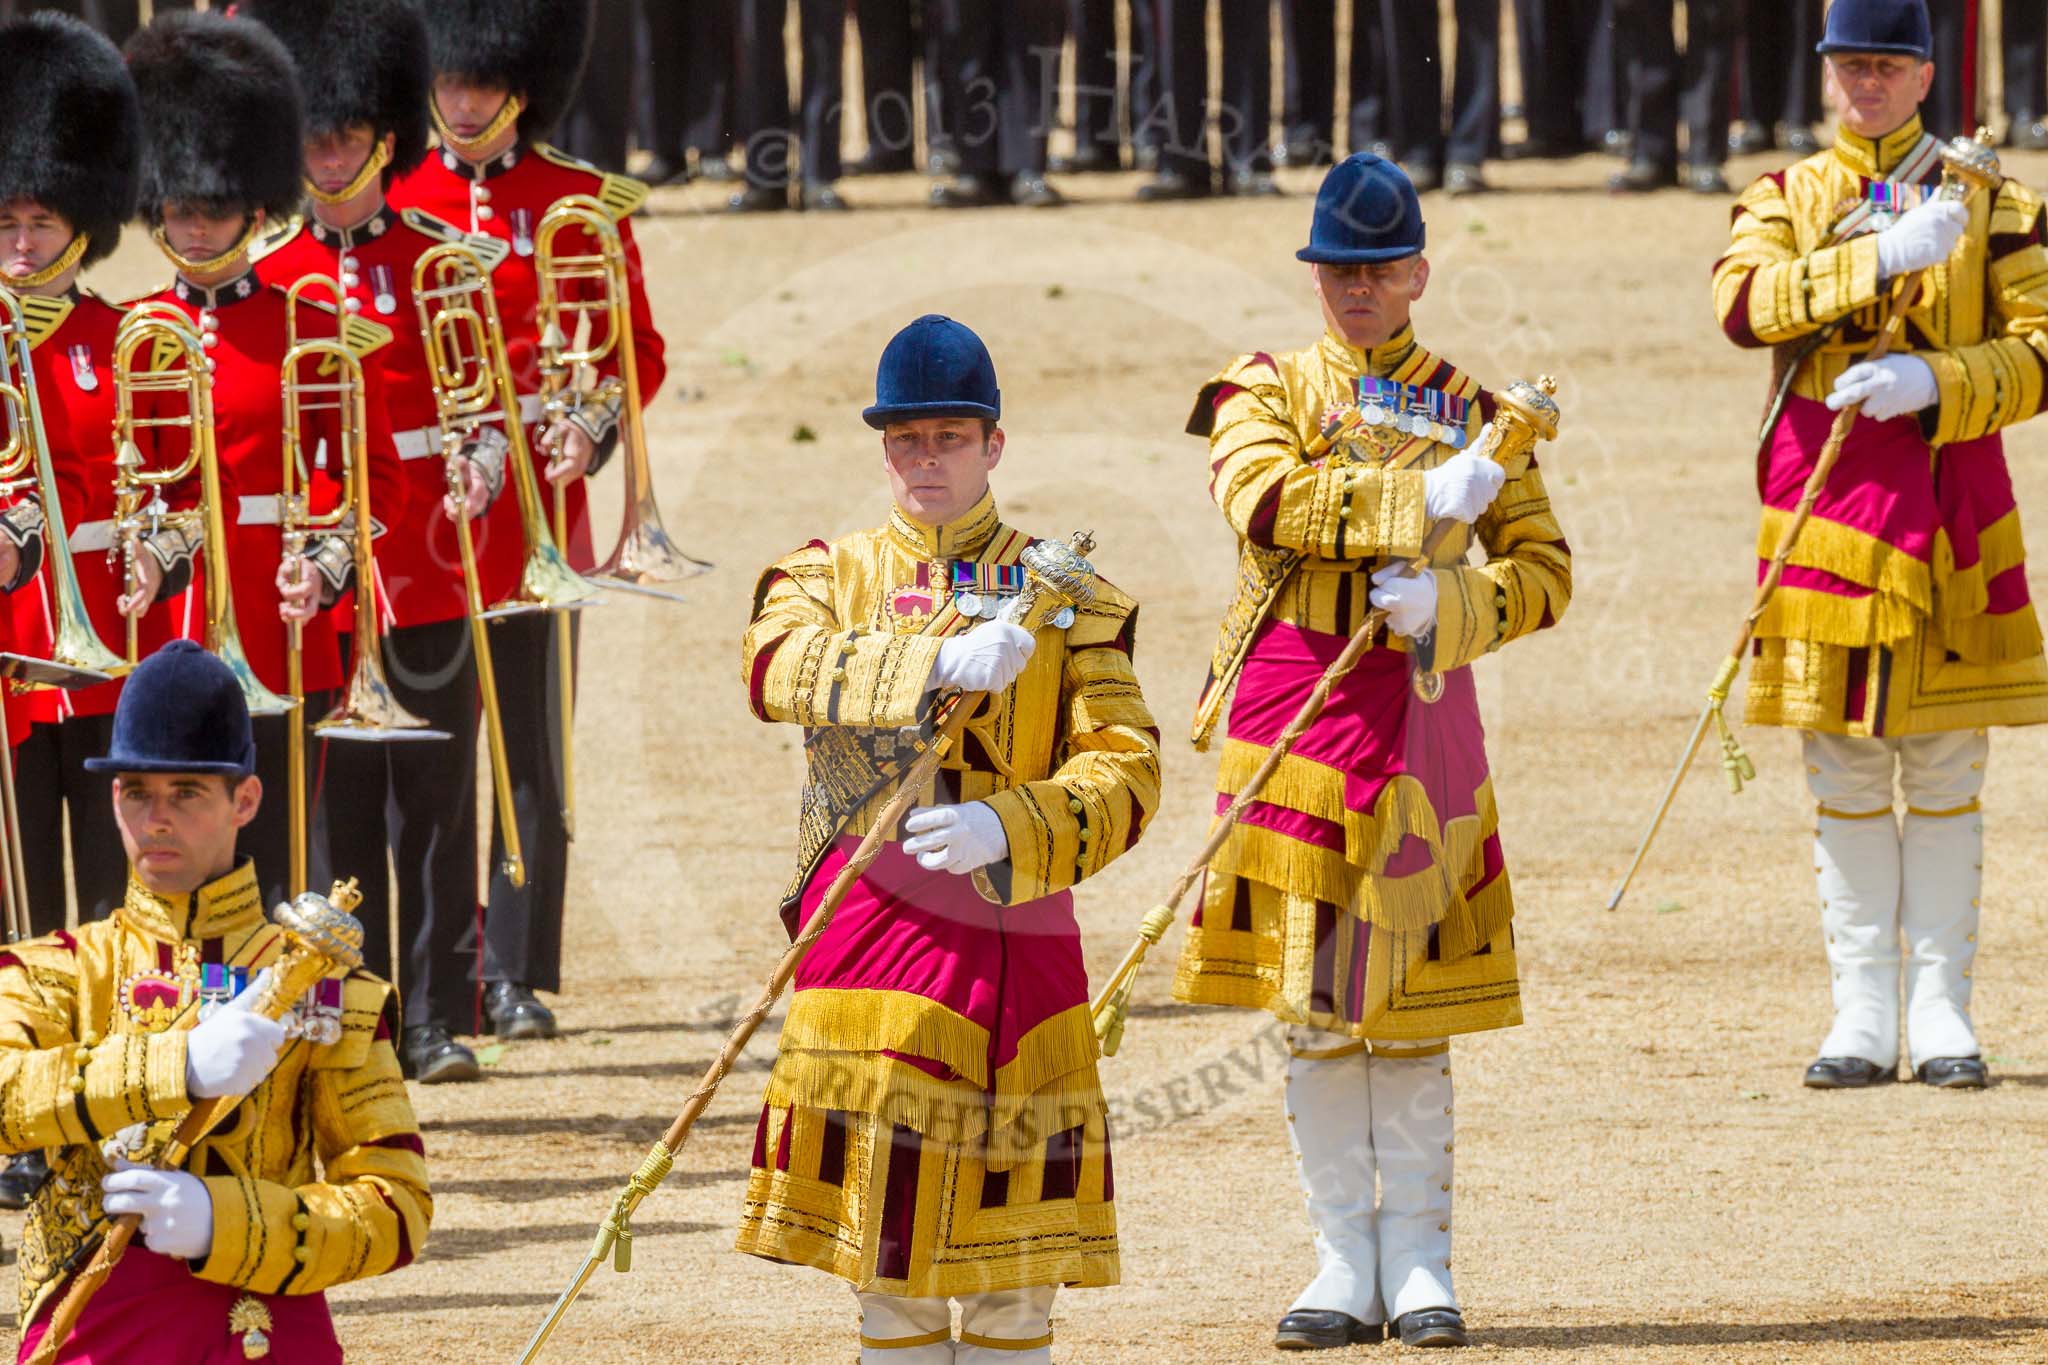 The Colonel's Review 2015.
Horse Guards Parade, Westminster,
London,

United Kingdom,
on 06 June 2015 at 11:50, image #459